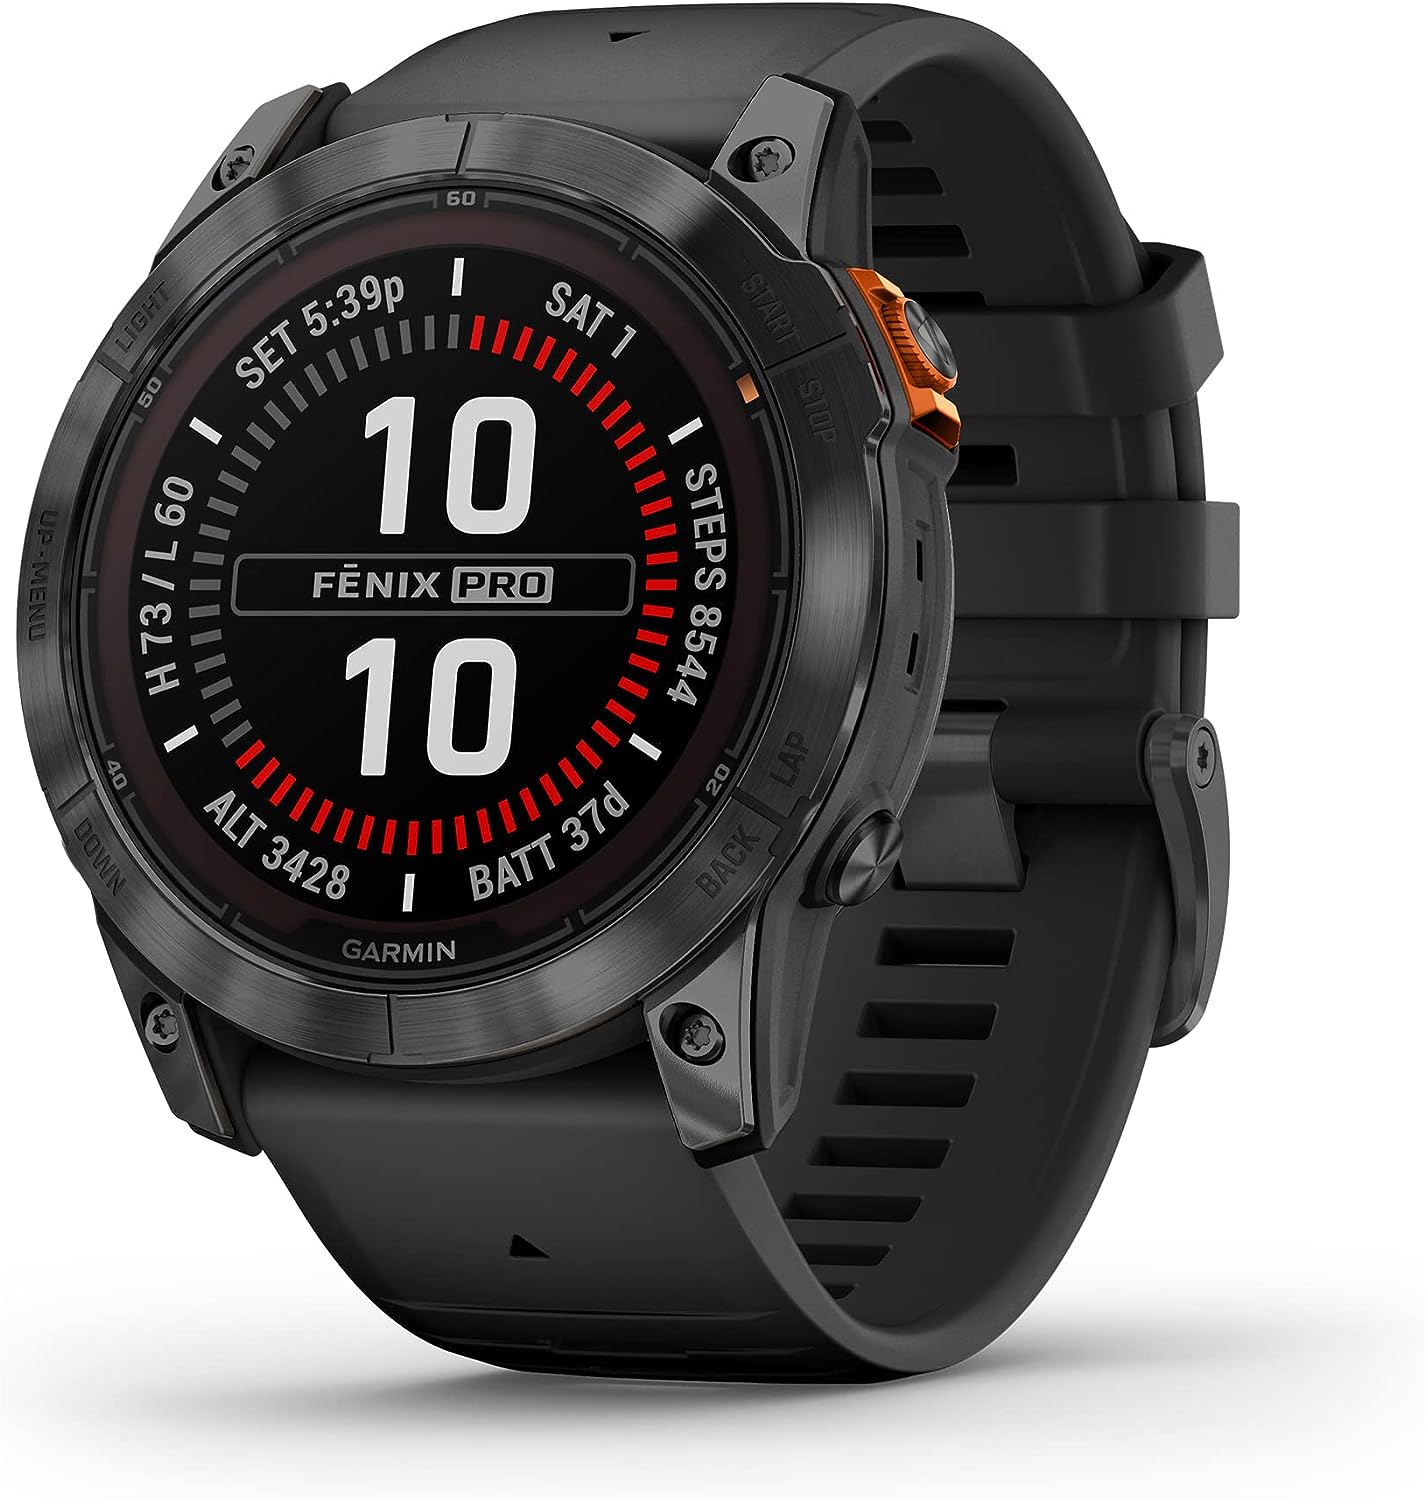 Outdoor Watches for Camping, Hiking & Climbing | REI Co-op